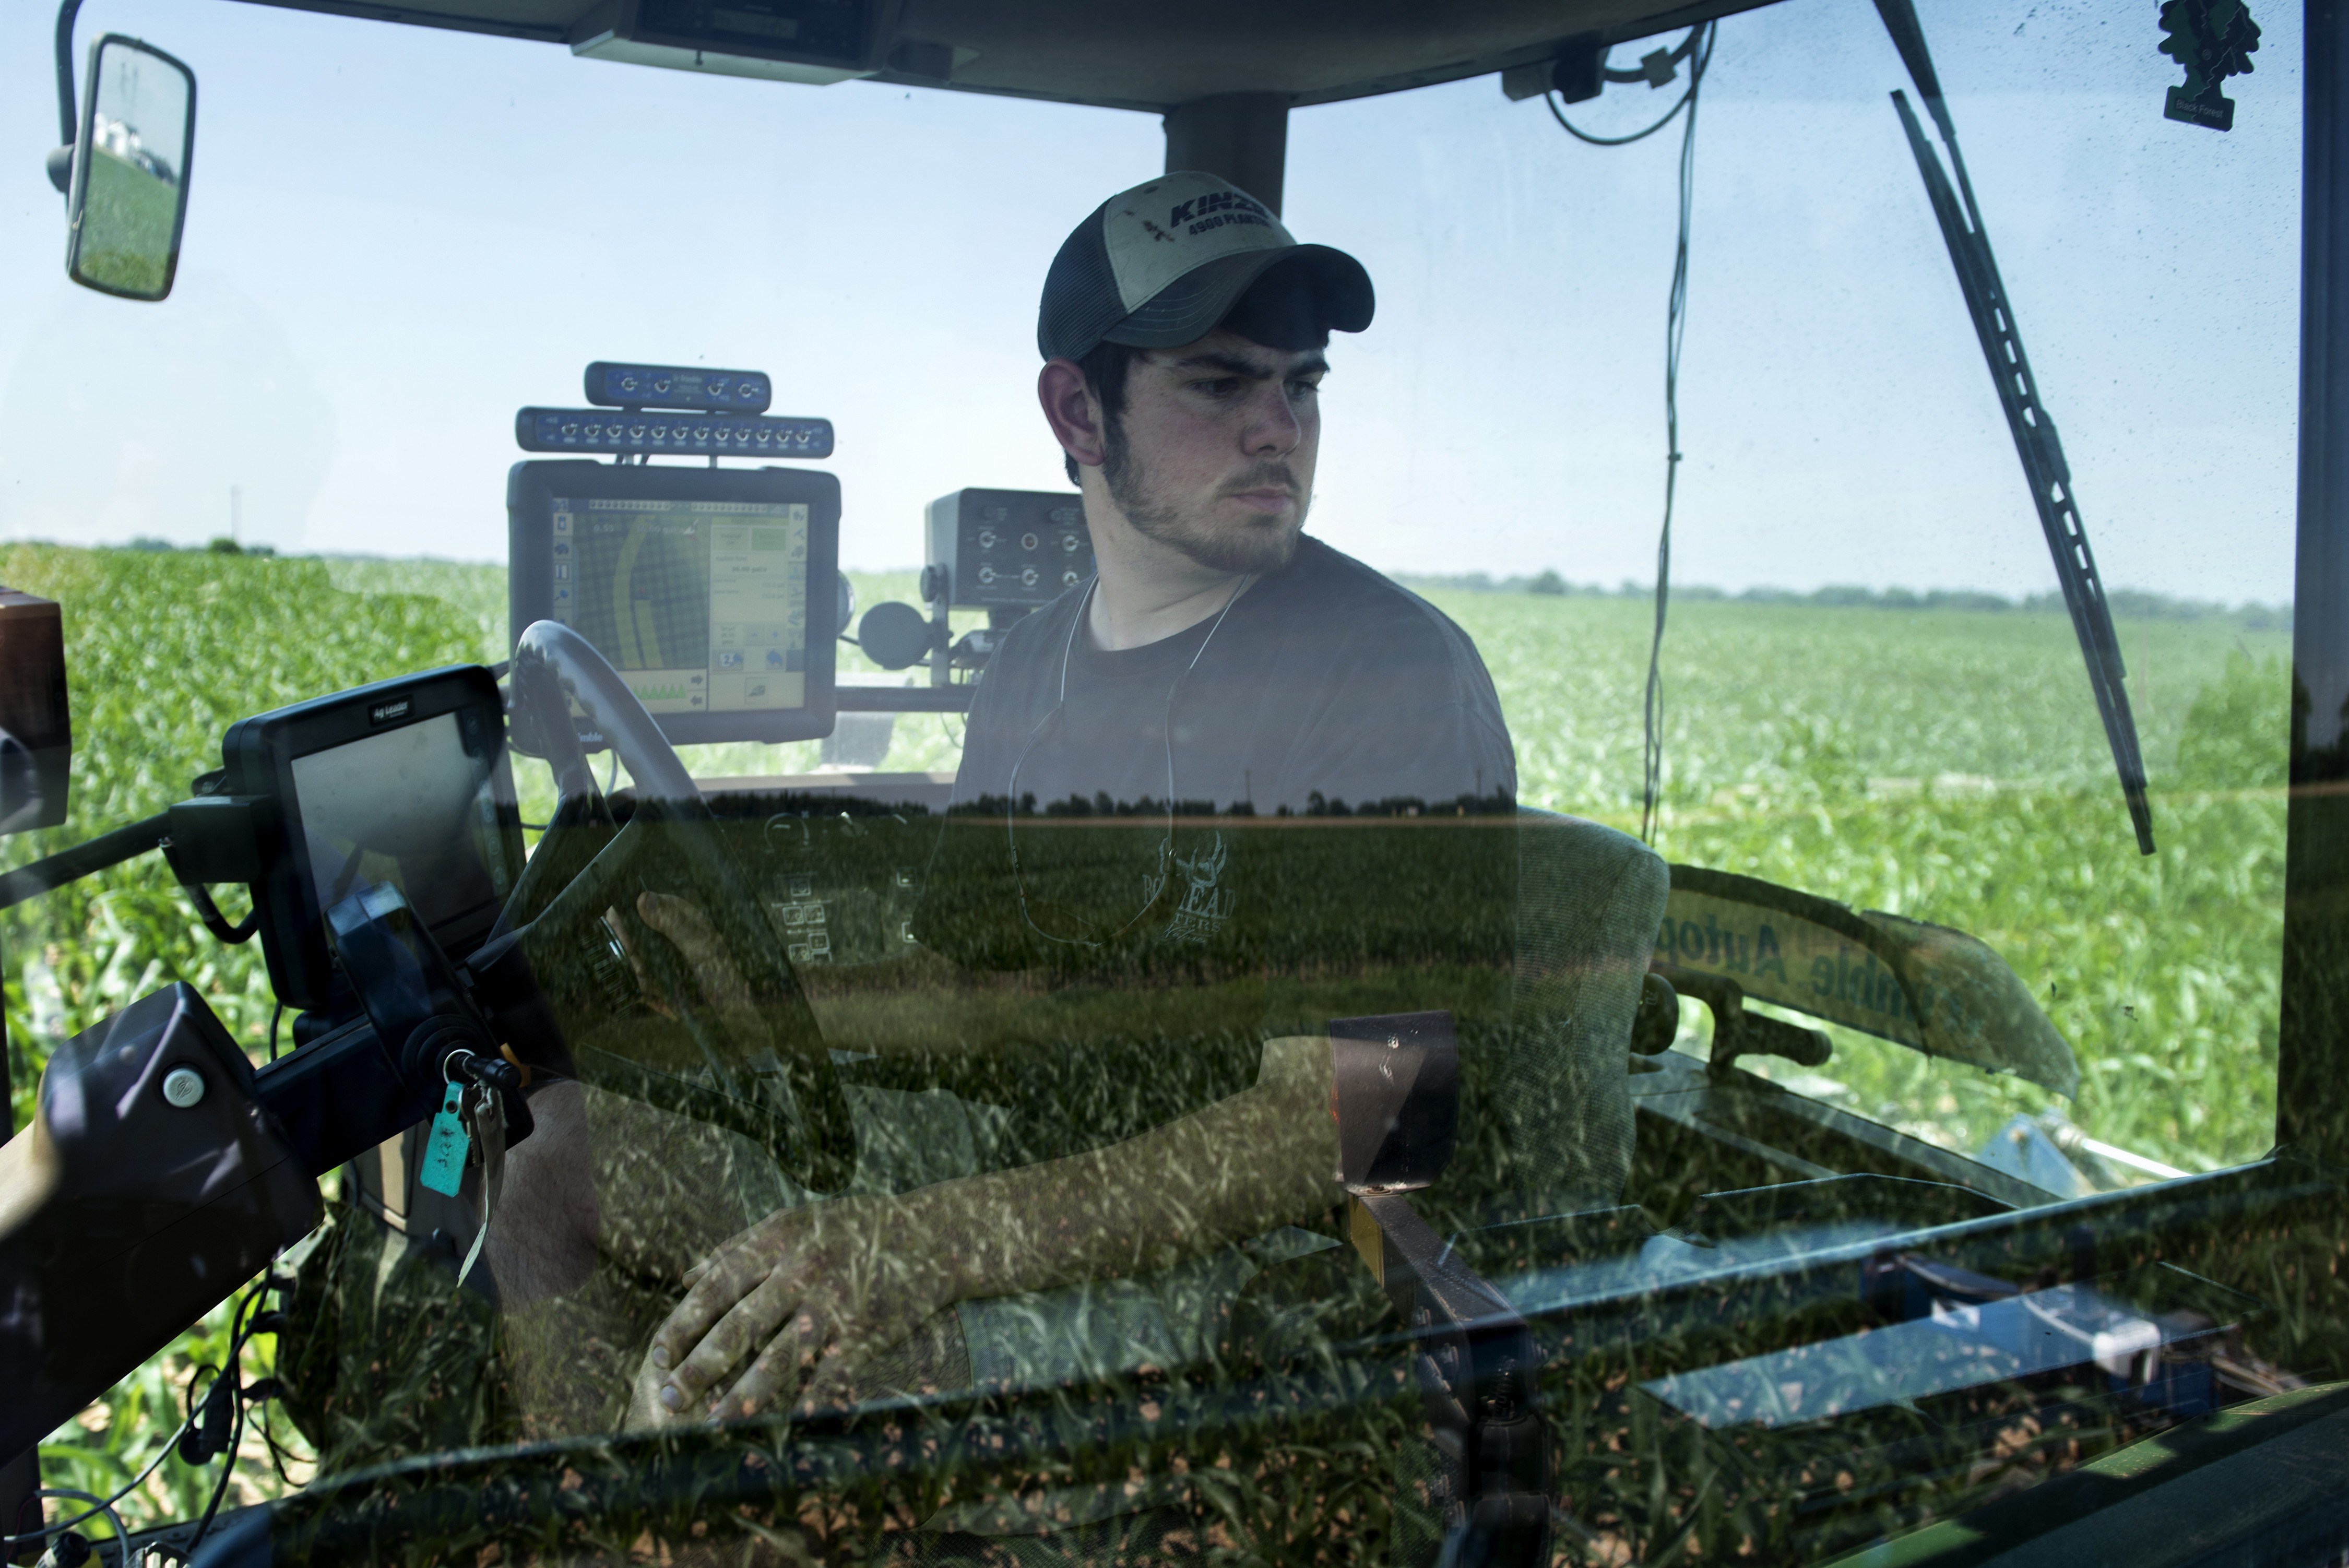 Andrew Isaacson watches from the cockpit of a tractor in a corn field as screens show where he has fertilized at the Little Bohemia Creek farm on June 17, 2014 in Warwick, Md. (Brendan Smialowski—AFP/Getty Images)